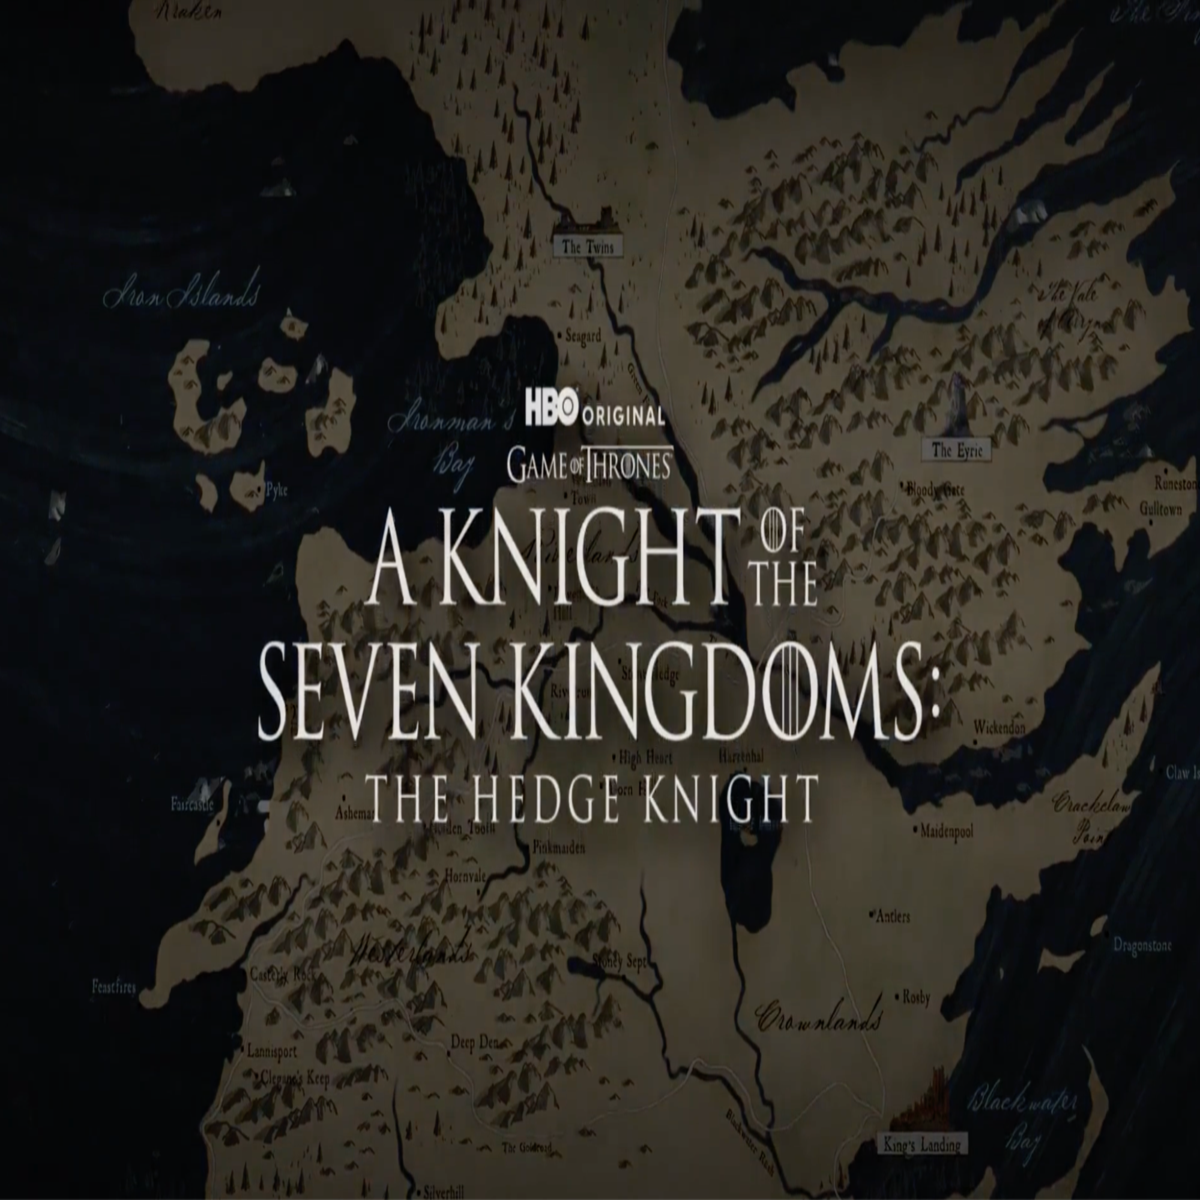 The Hedge Knight, the next Game of Thrones prequel, is set 100